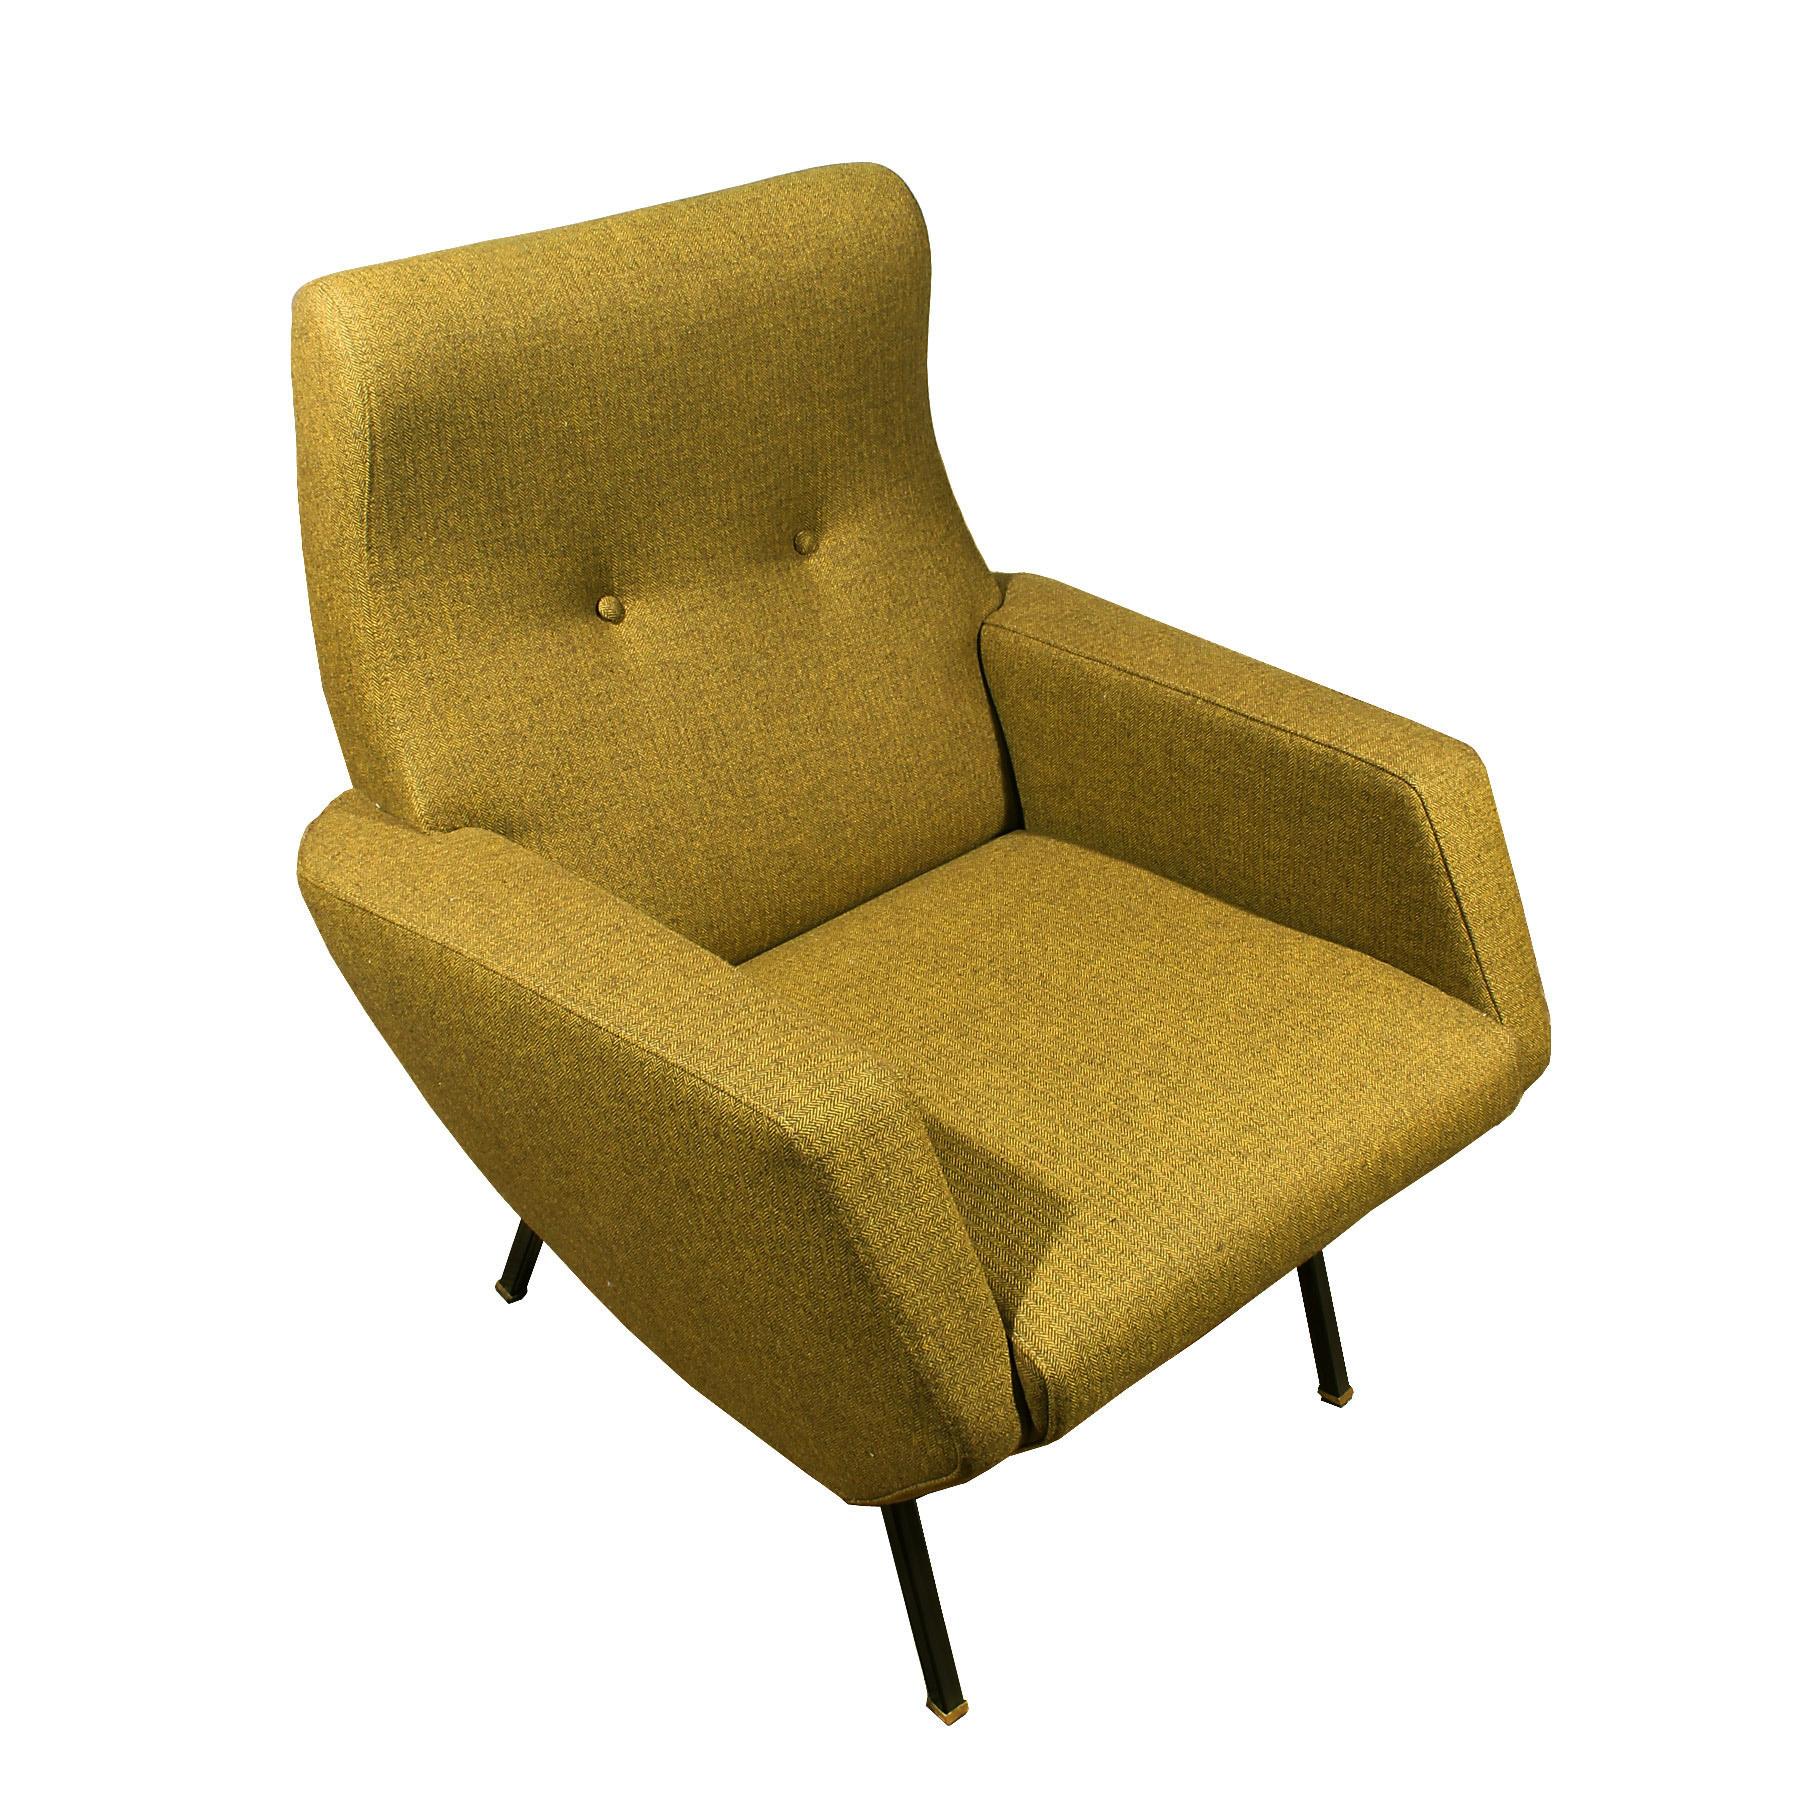 Pair of Mid-Century Modern Armchairs in New Mottled Yellow Fabric - Italy, 1960s For Sale 1